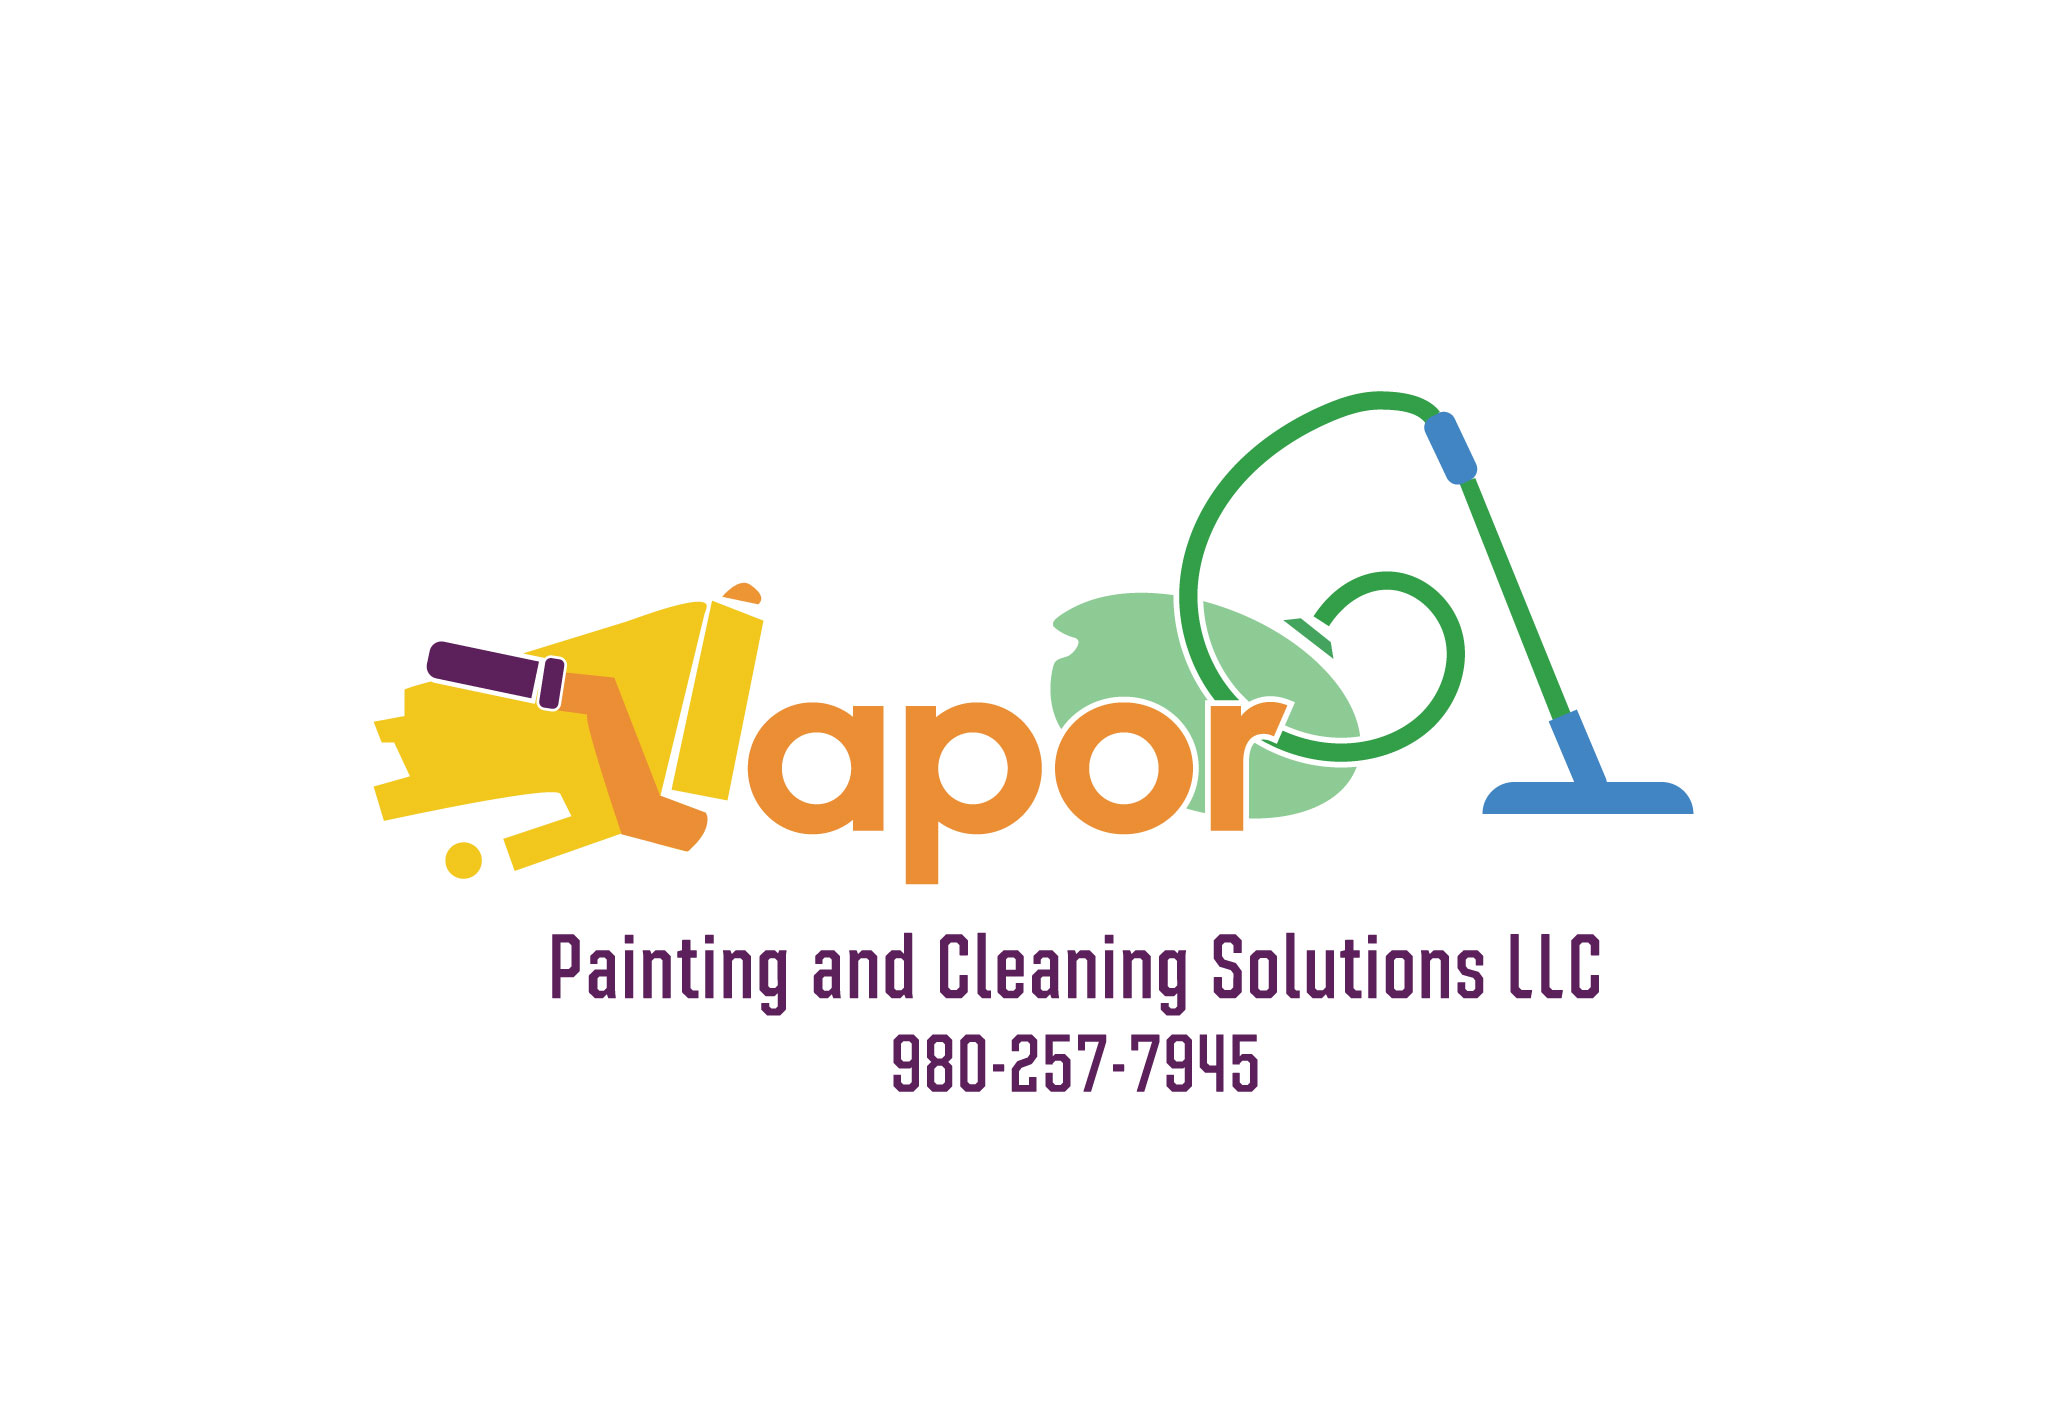 Vapor Painting and Cleaning Solutions Logo